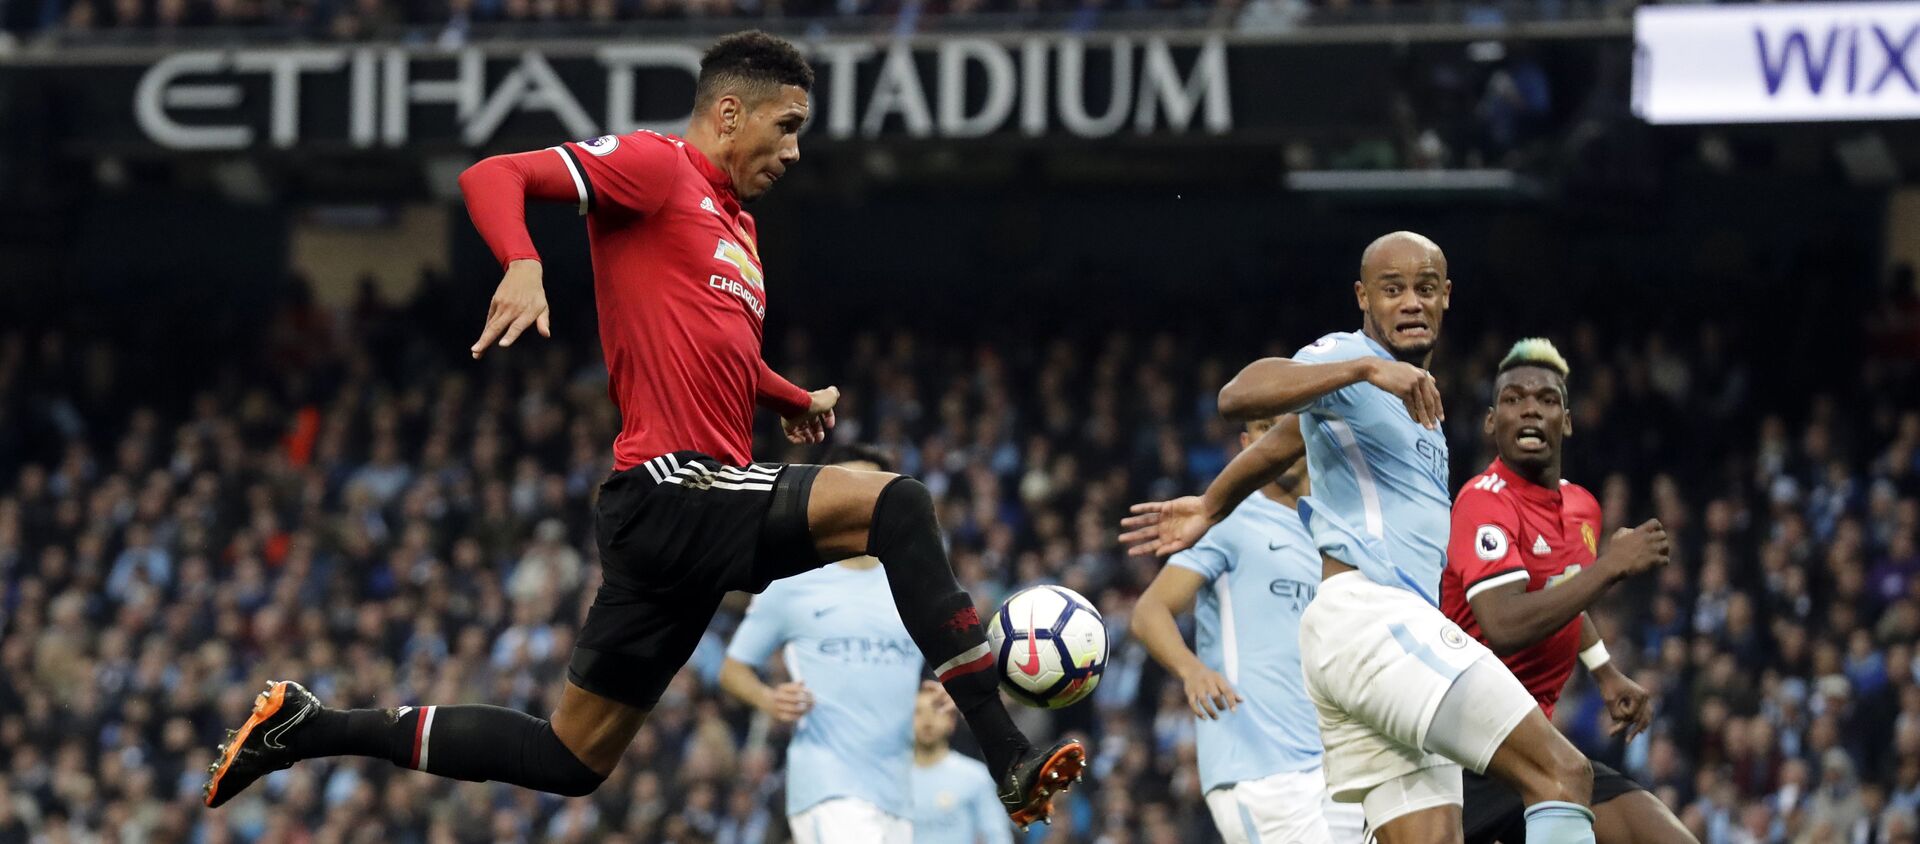 Manchester United's Chris Smalling, left, scores his side's third goal during the English Premier League soccer match between Manchester City and Manchester United at the Etihad Stadium in Manchester, England, Saturday April 7, 2018 - اسپوتنیک افغانستان  , 1920, 16.04.2021